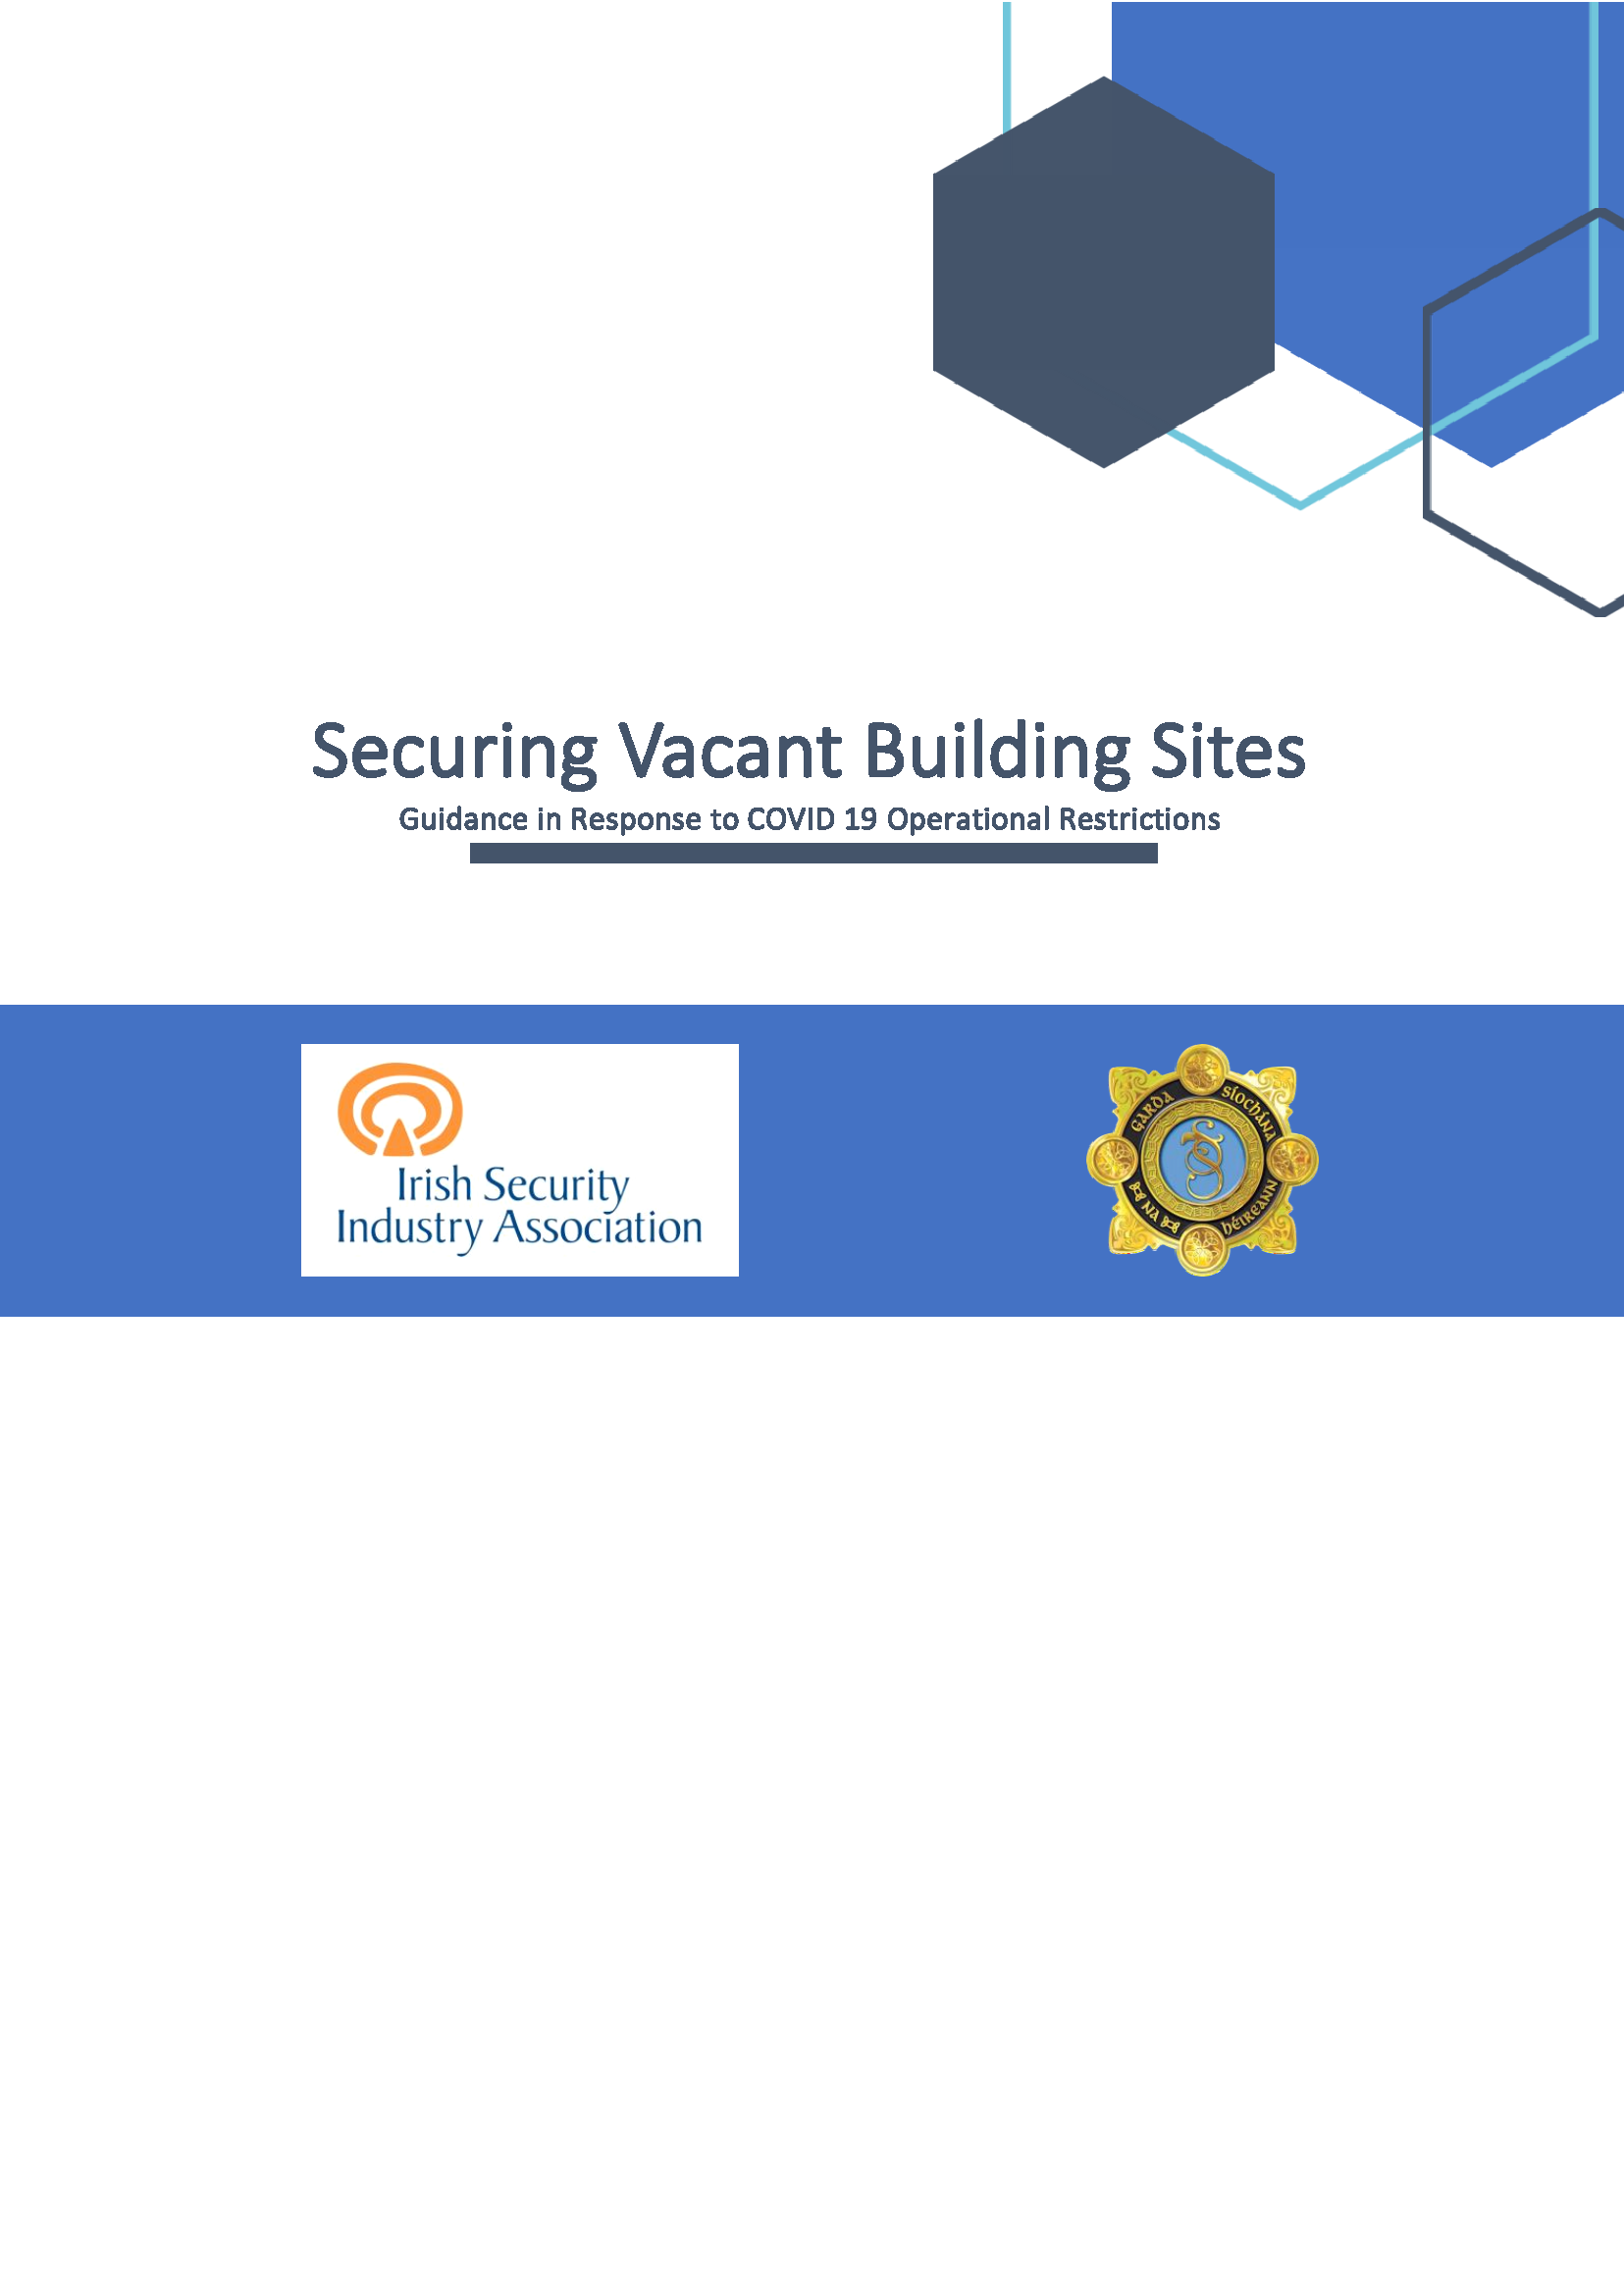 Securing Vacant Building Sites FINAL_1